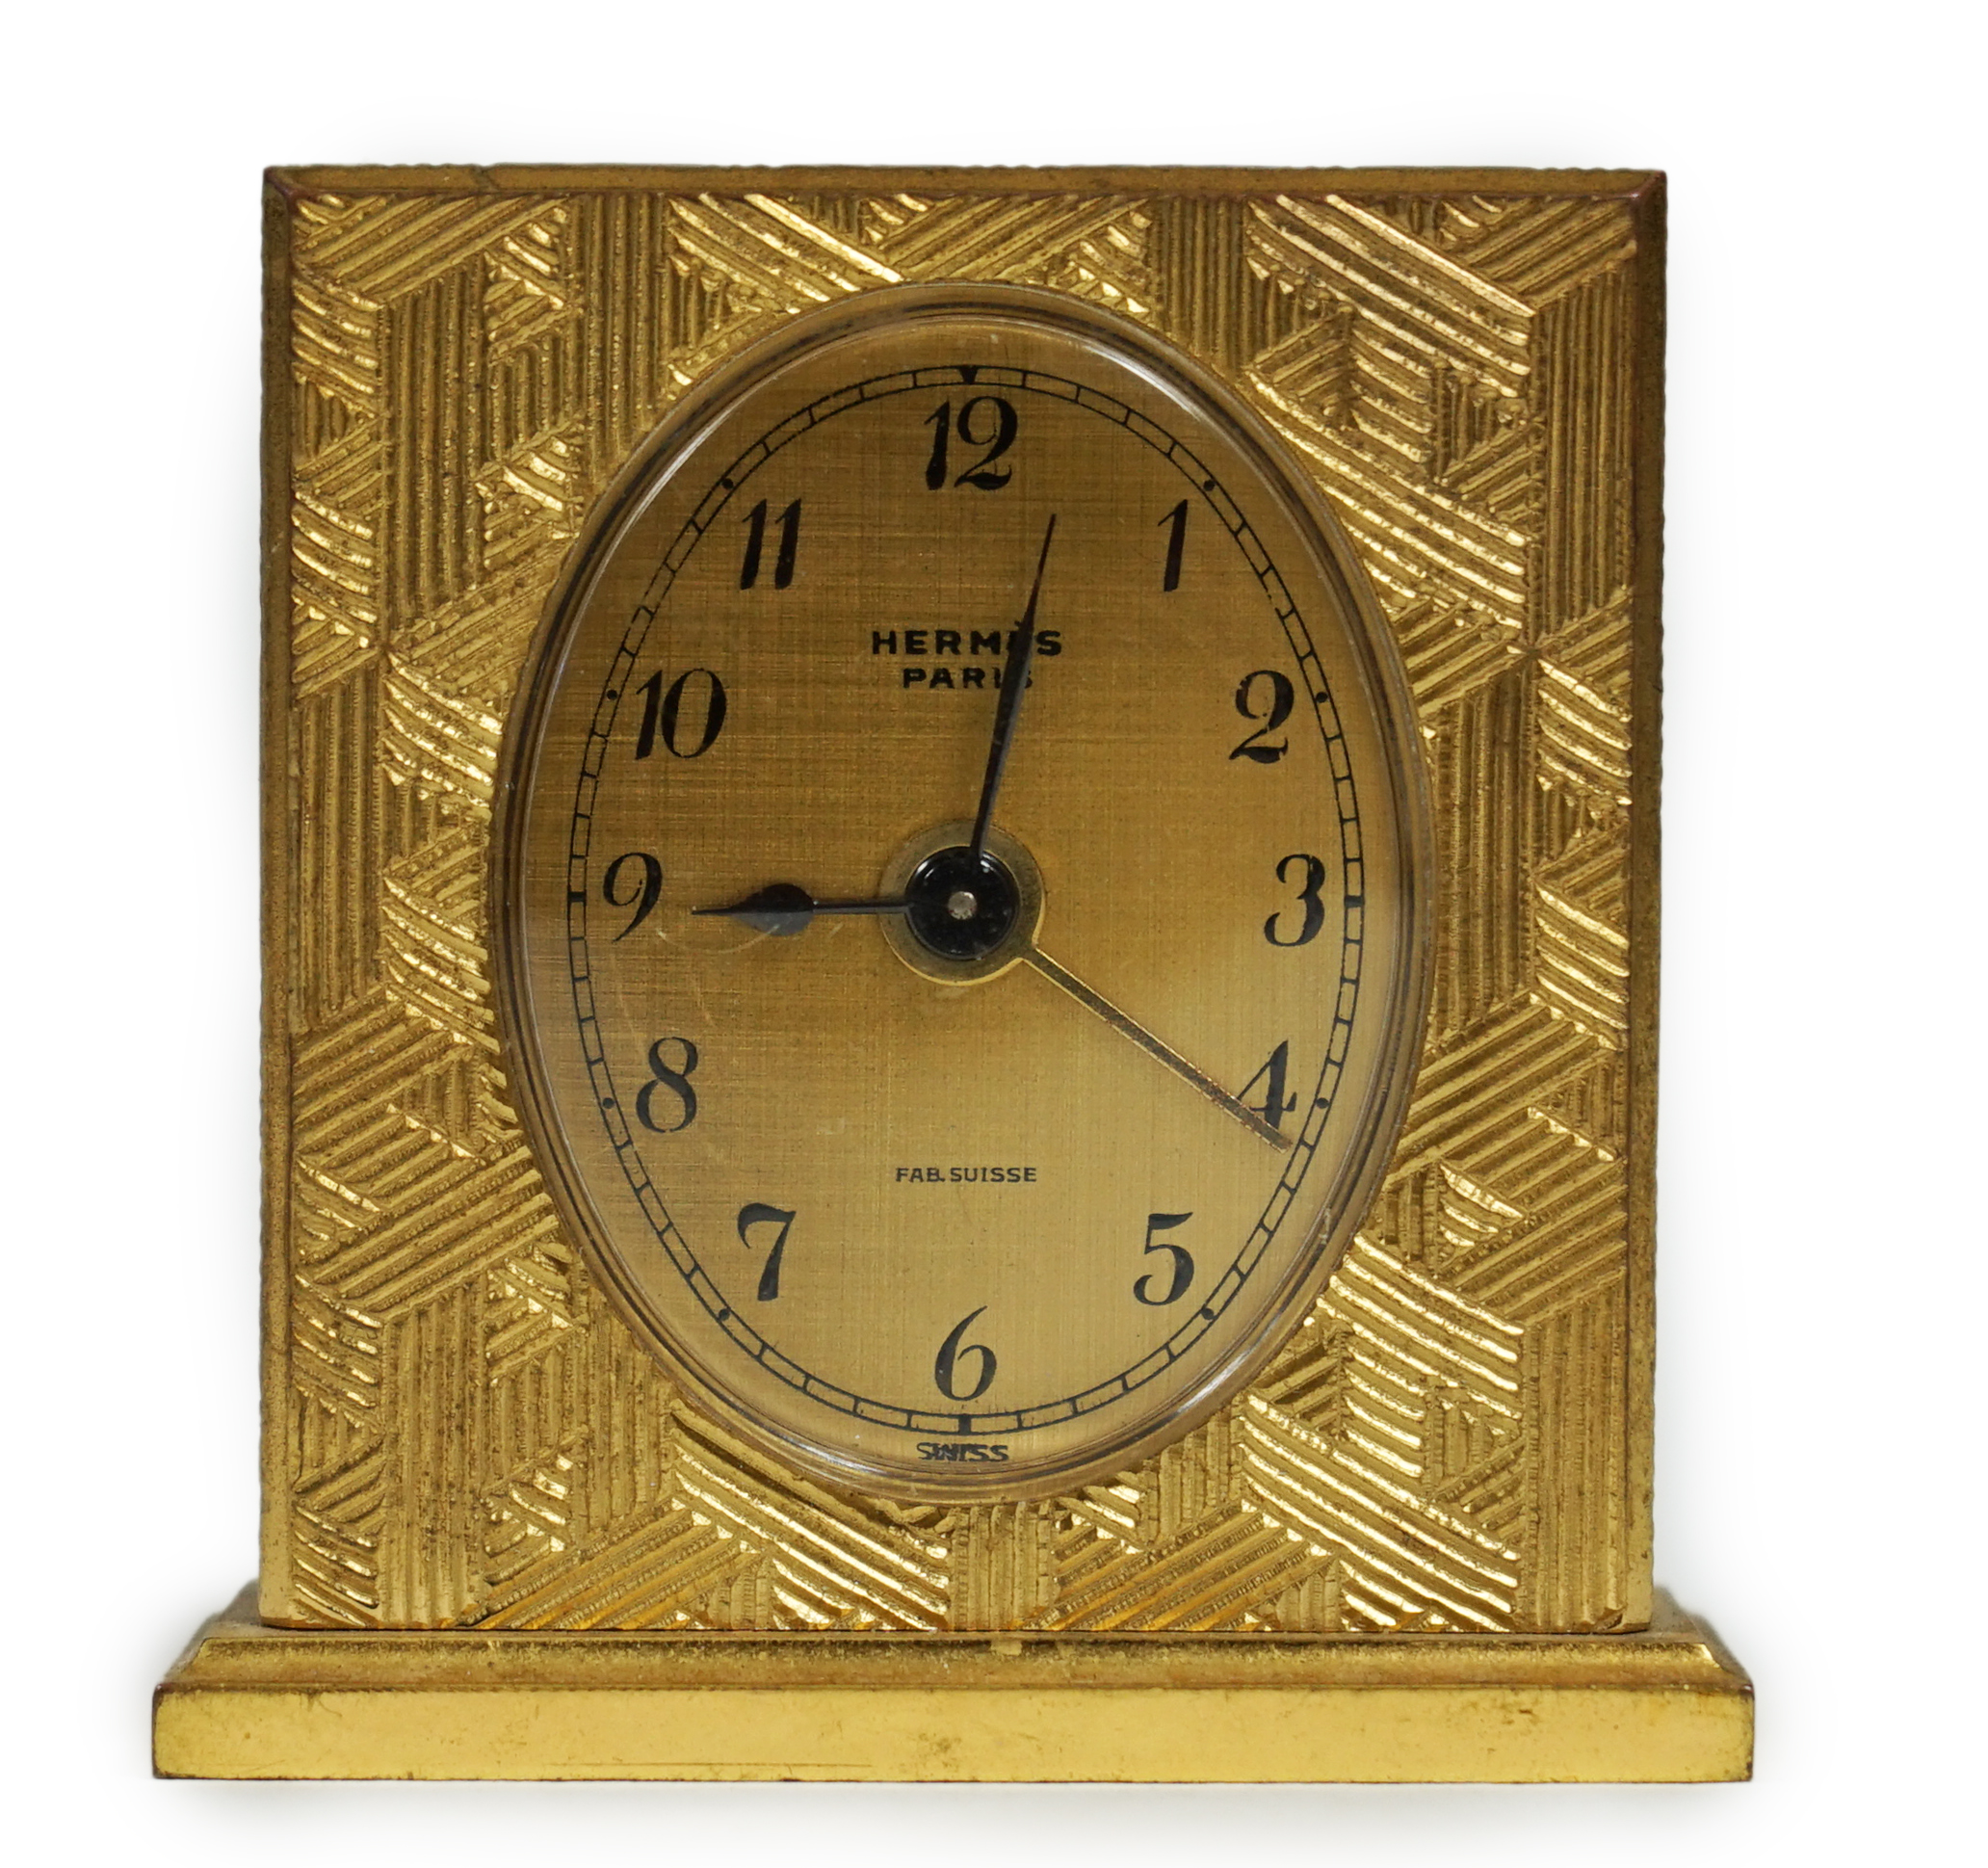 A Hermès travel alarm clock in gilded brass chiselled with H enchassés, height 5cm